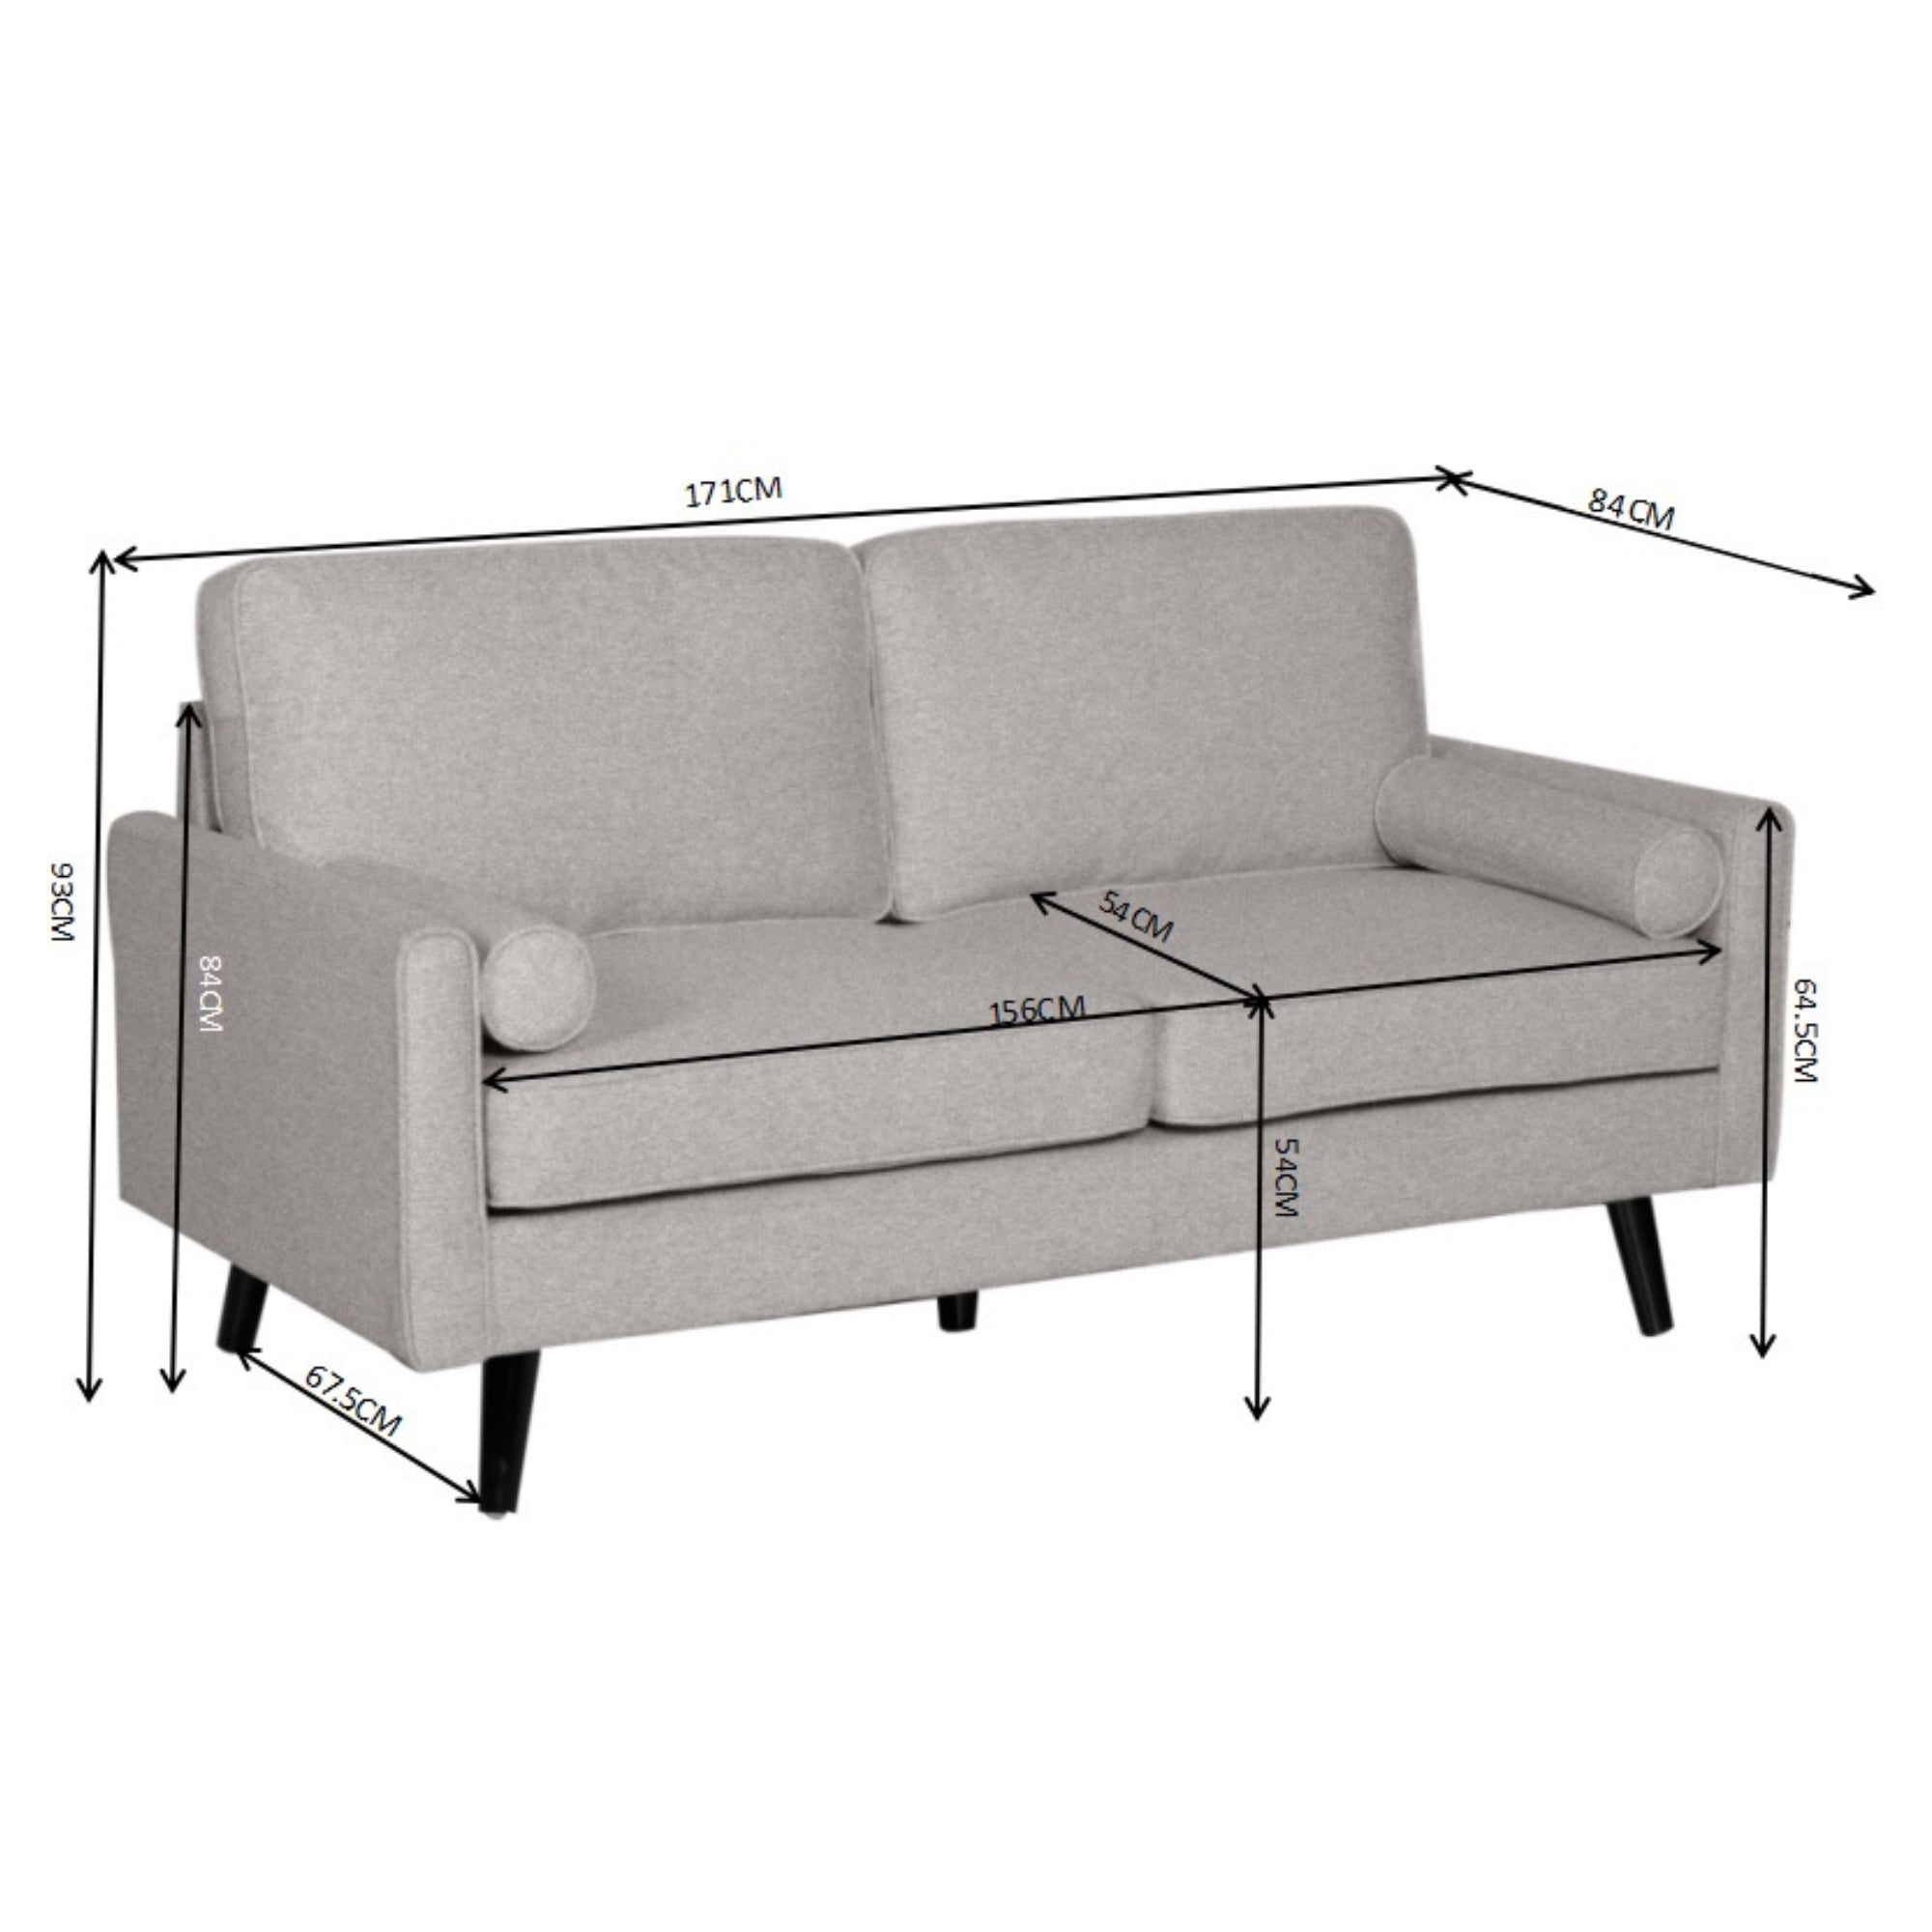 Compact Light Grey 2.5 Seater Sofa with Cushions, Wood Legs